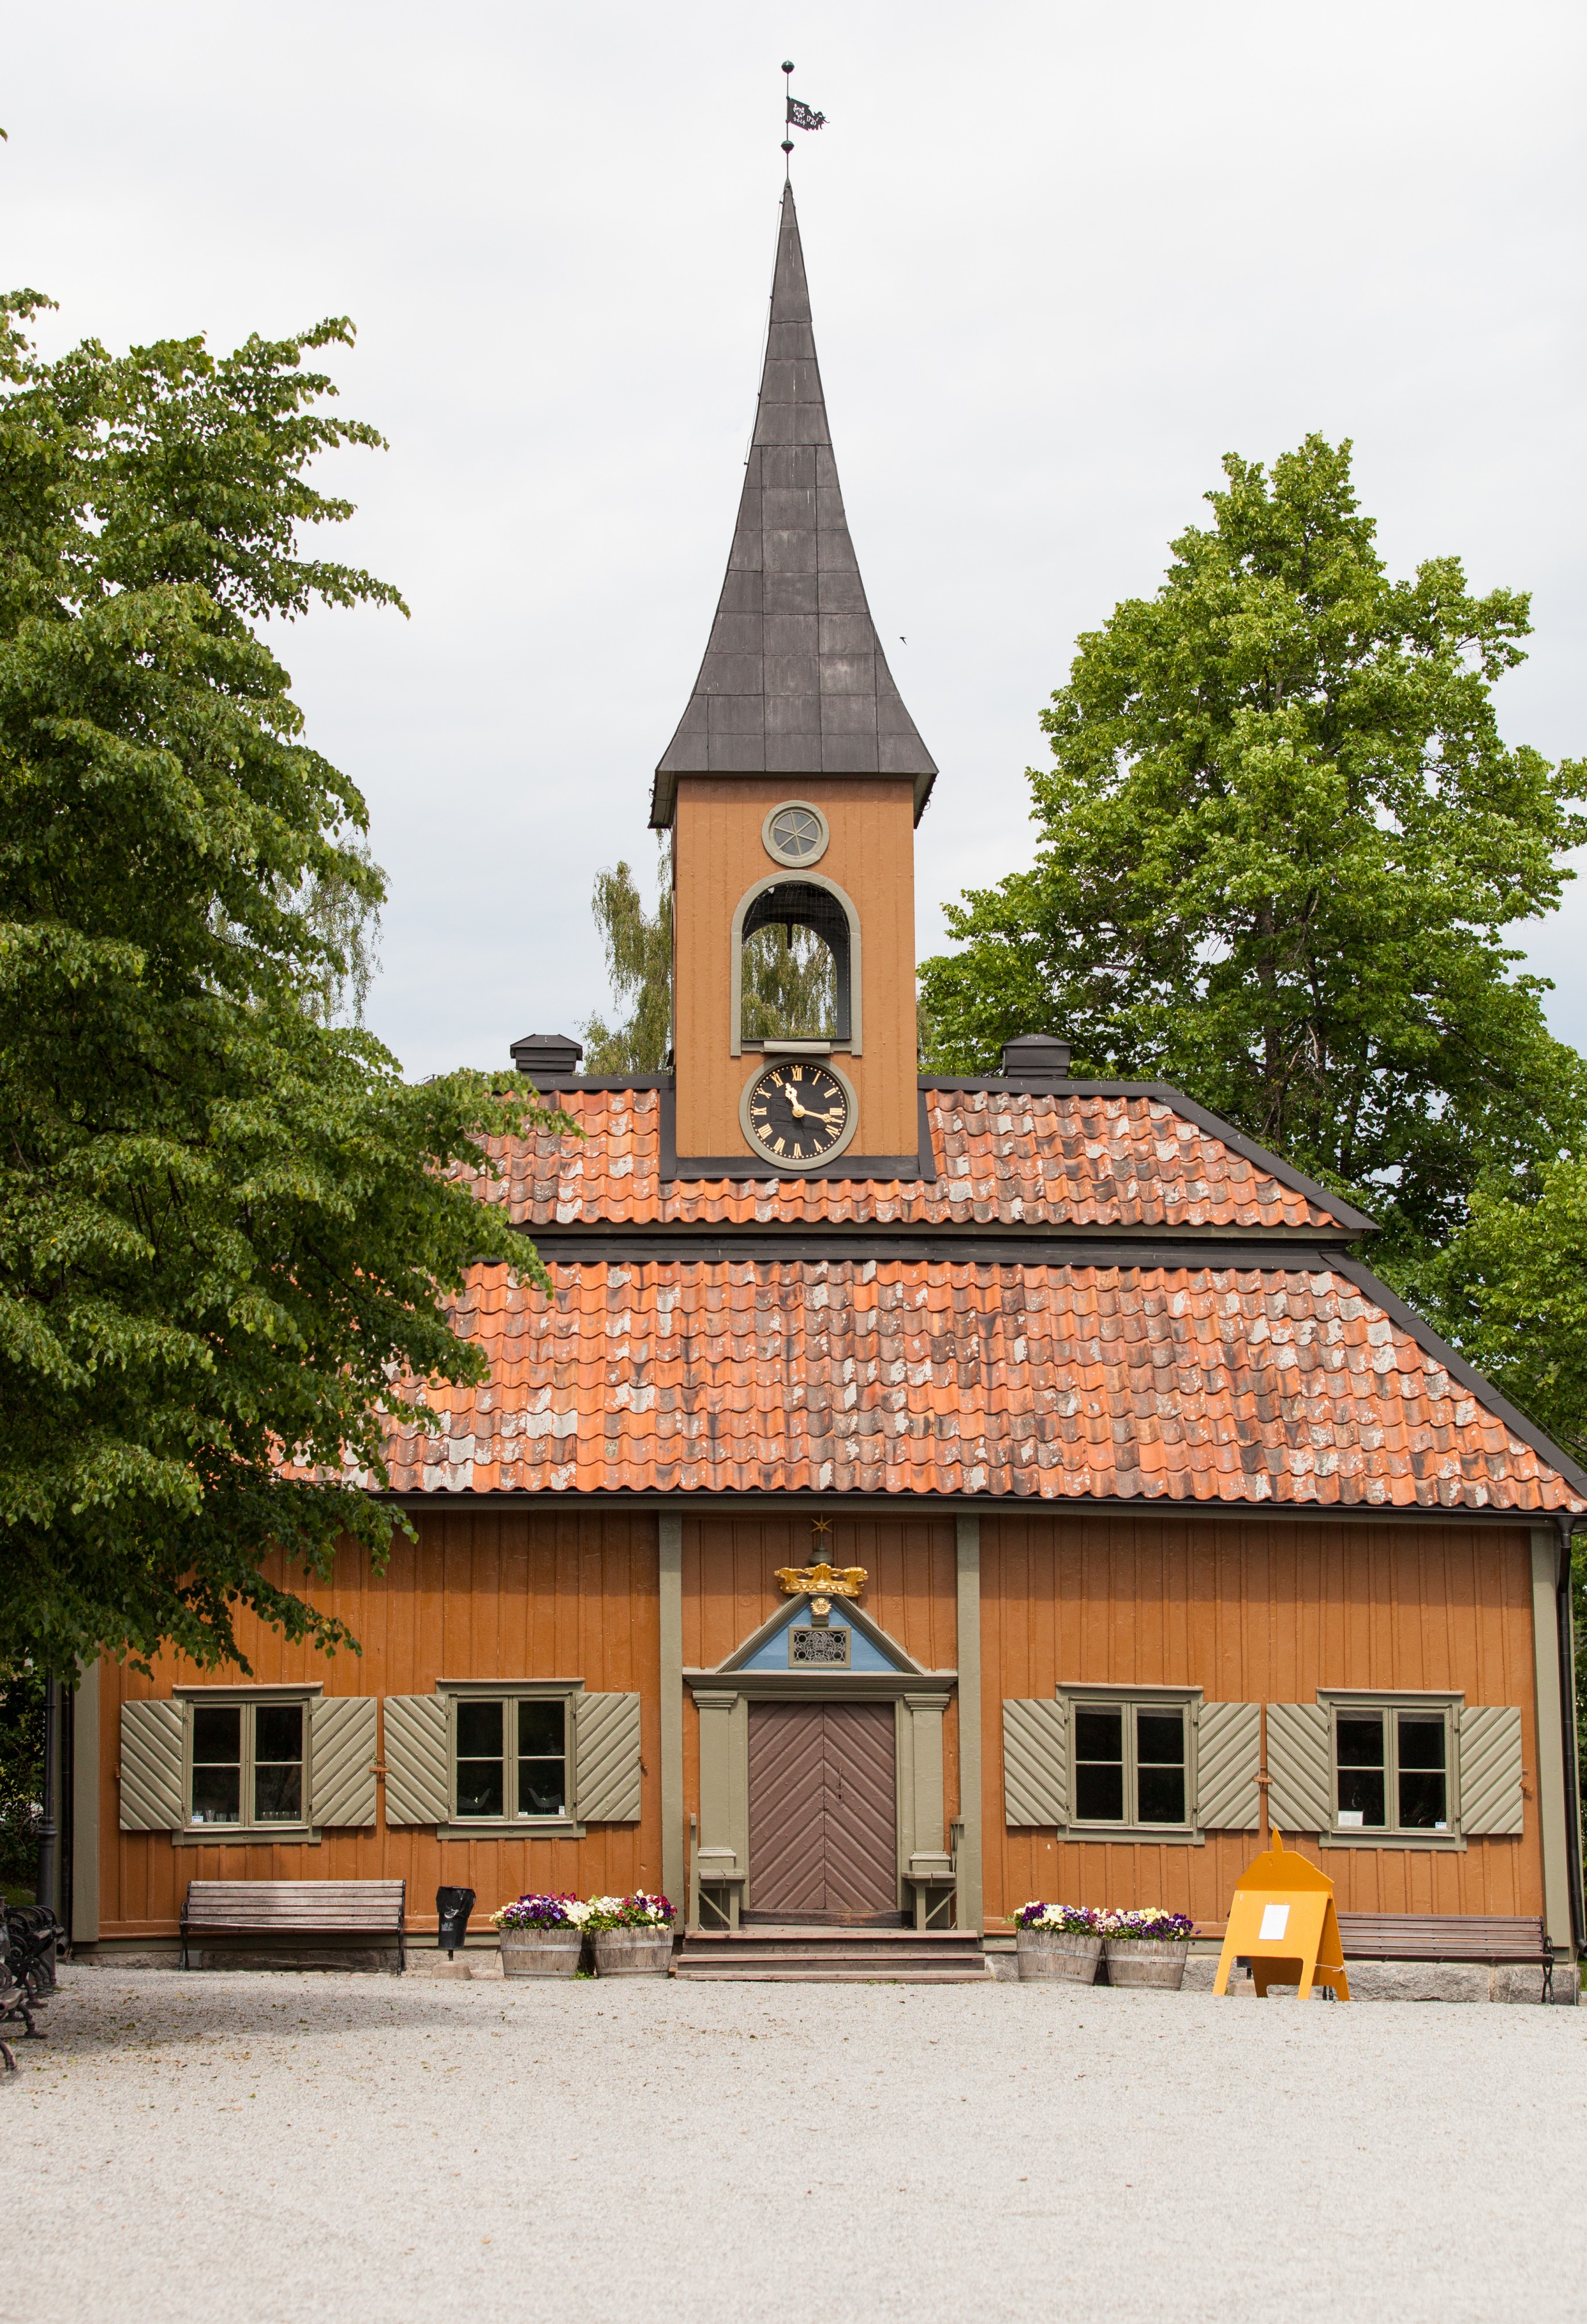 Sigtuna town, Sweden, June 2014, picture 14